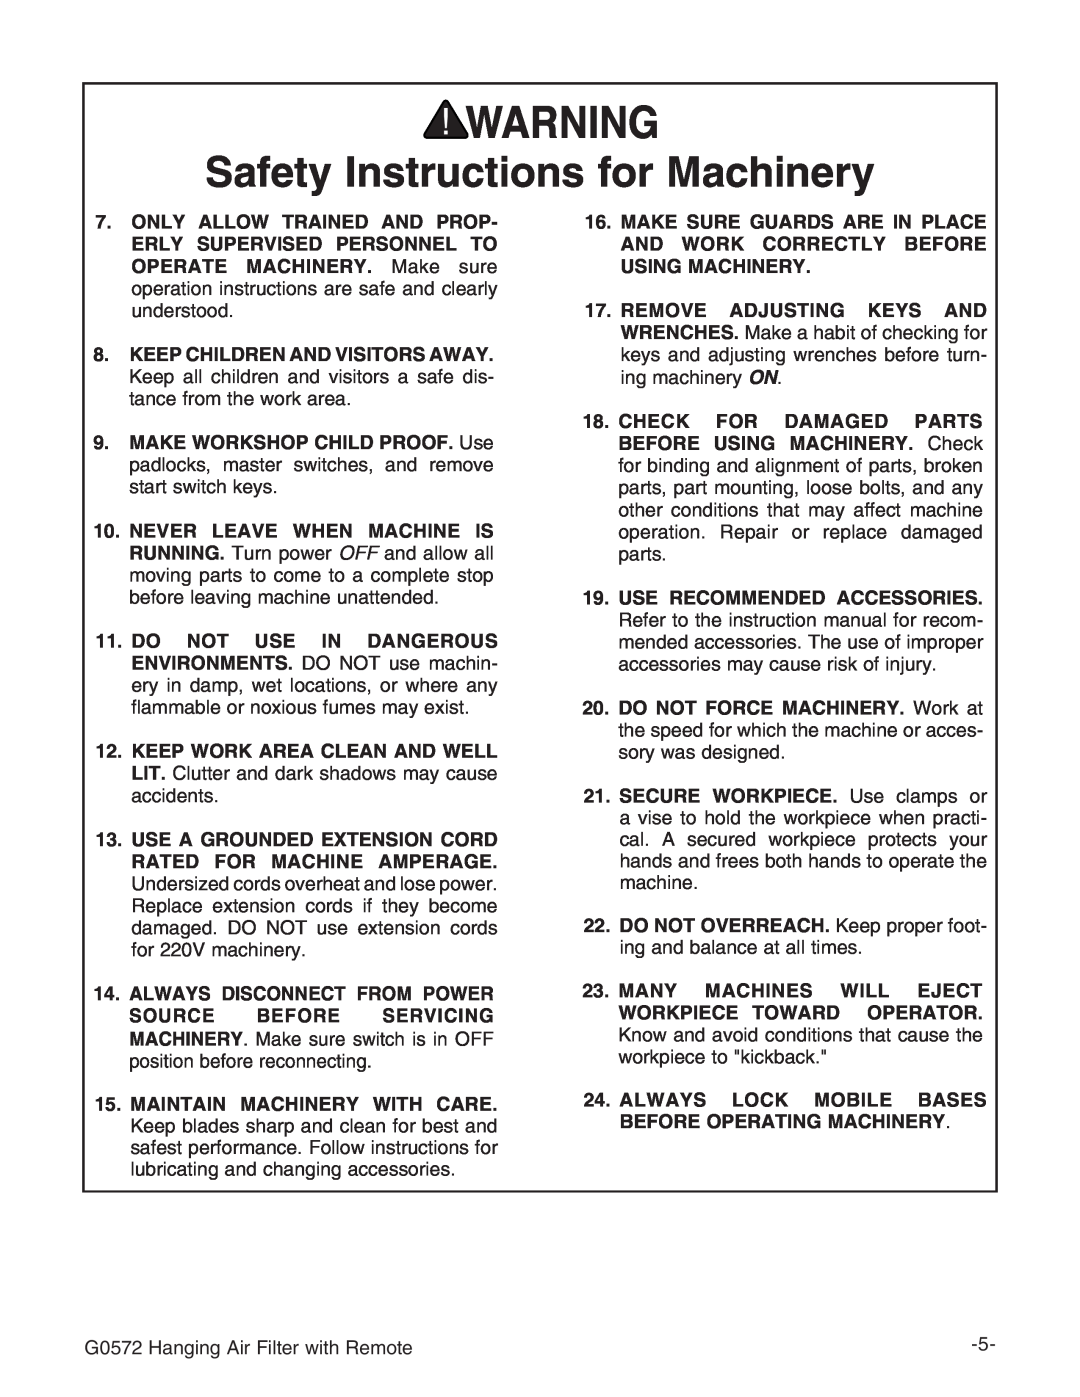 Grizzly instruction manual Safety Instructions for Machinery, G0572 Hanging Air Filter with Remote 